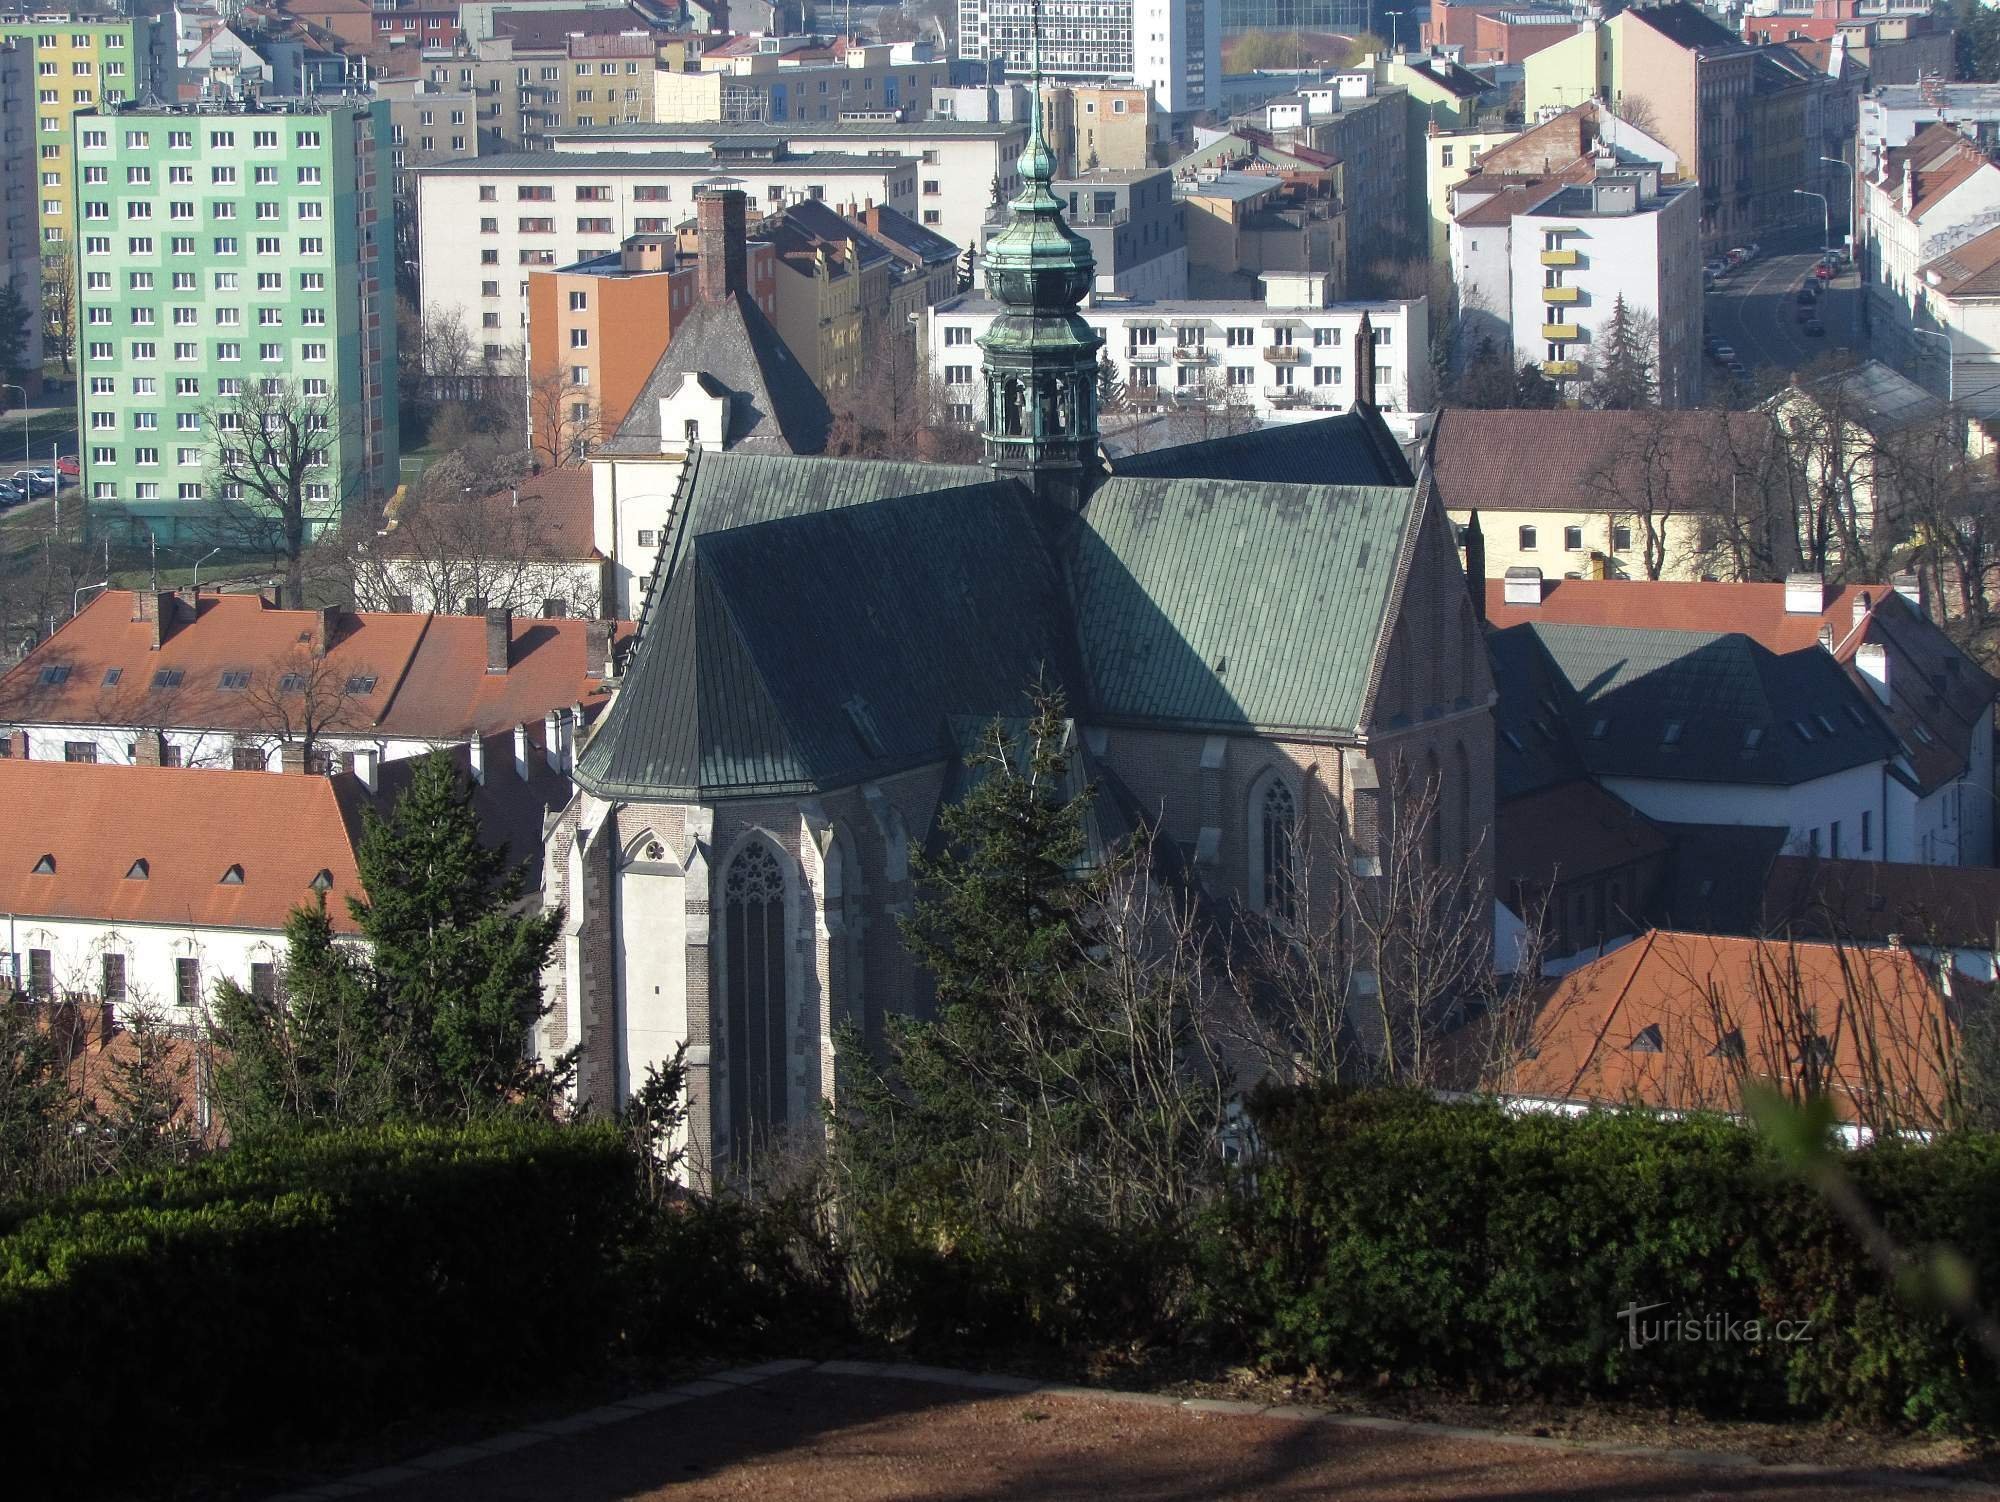 Brno Basilica of the Assumption of the Virgin Mary